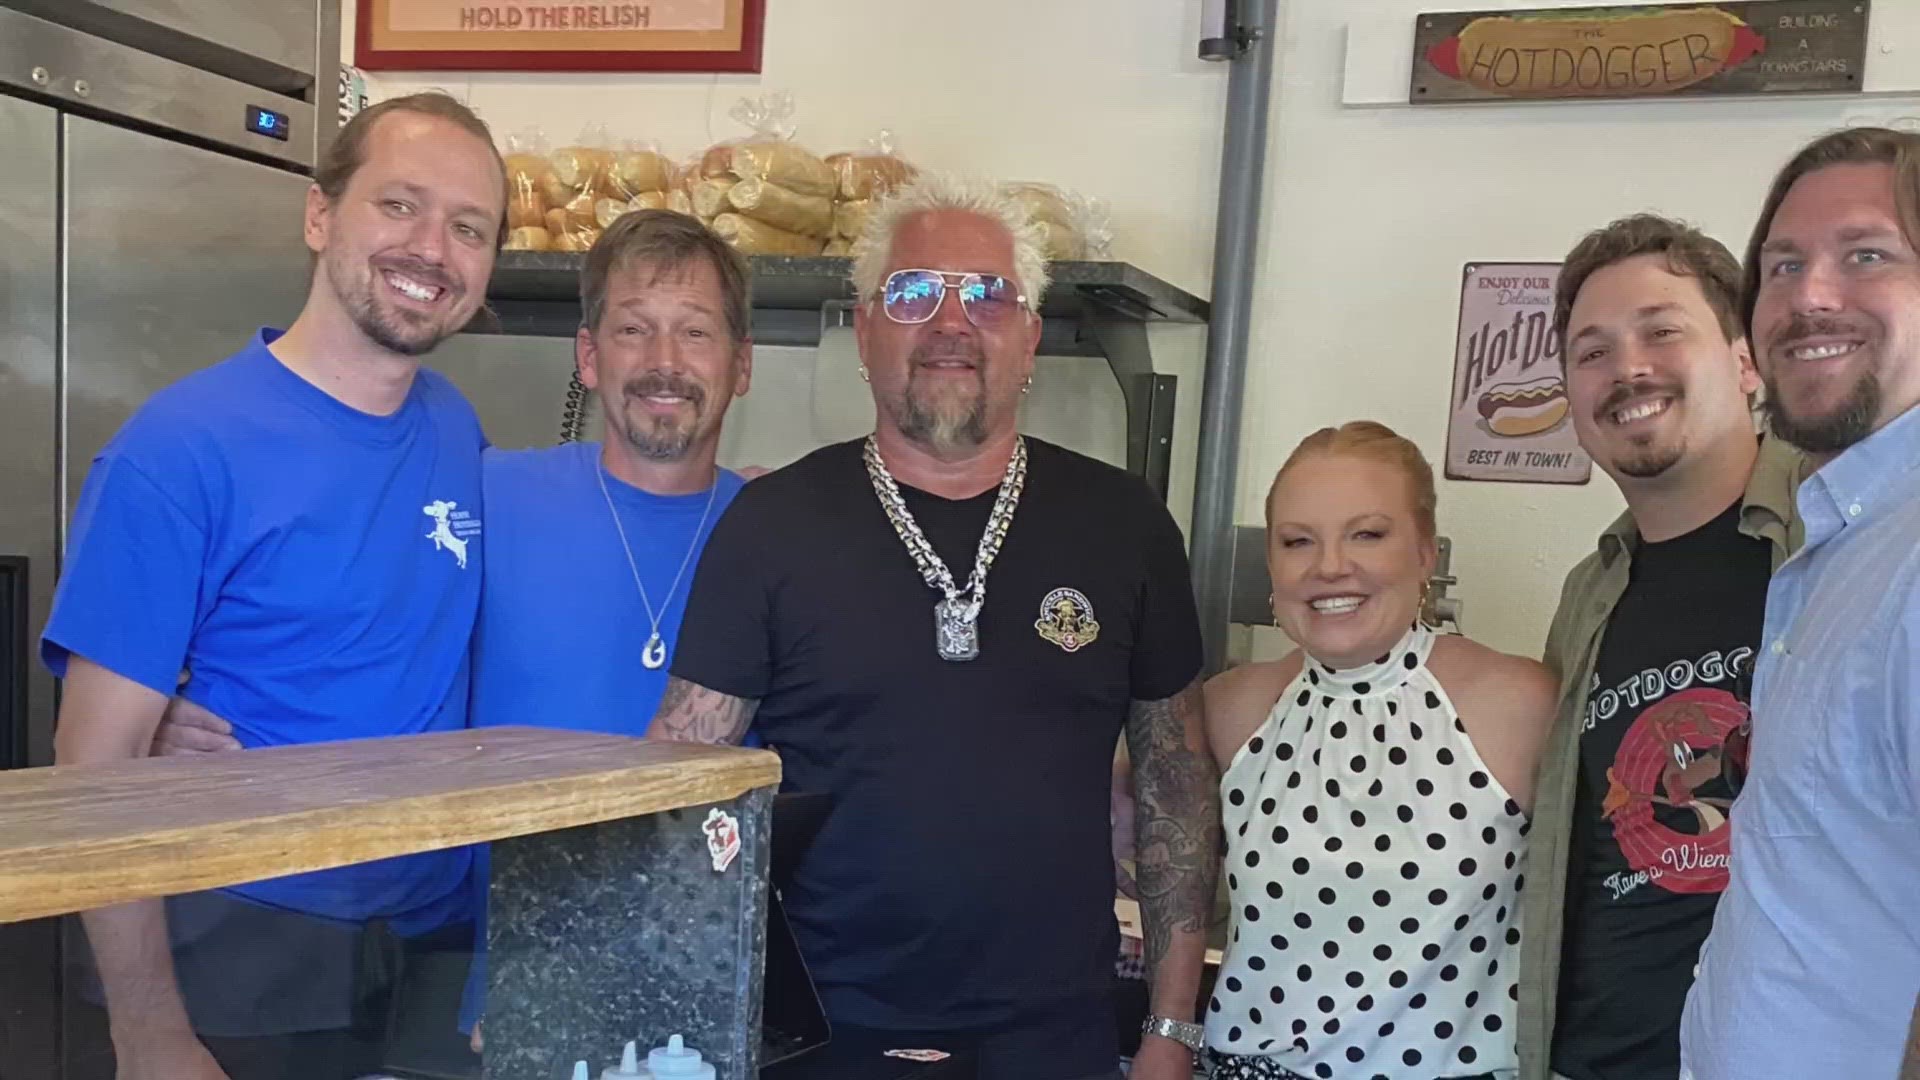 Out of six Davis eateries, The Hotdogger was crowned the 'Best Bite in Town' on a new Food Network show hosted by Guy Fieri.